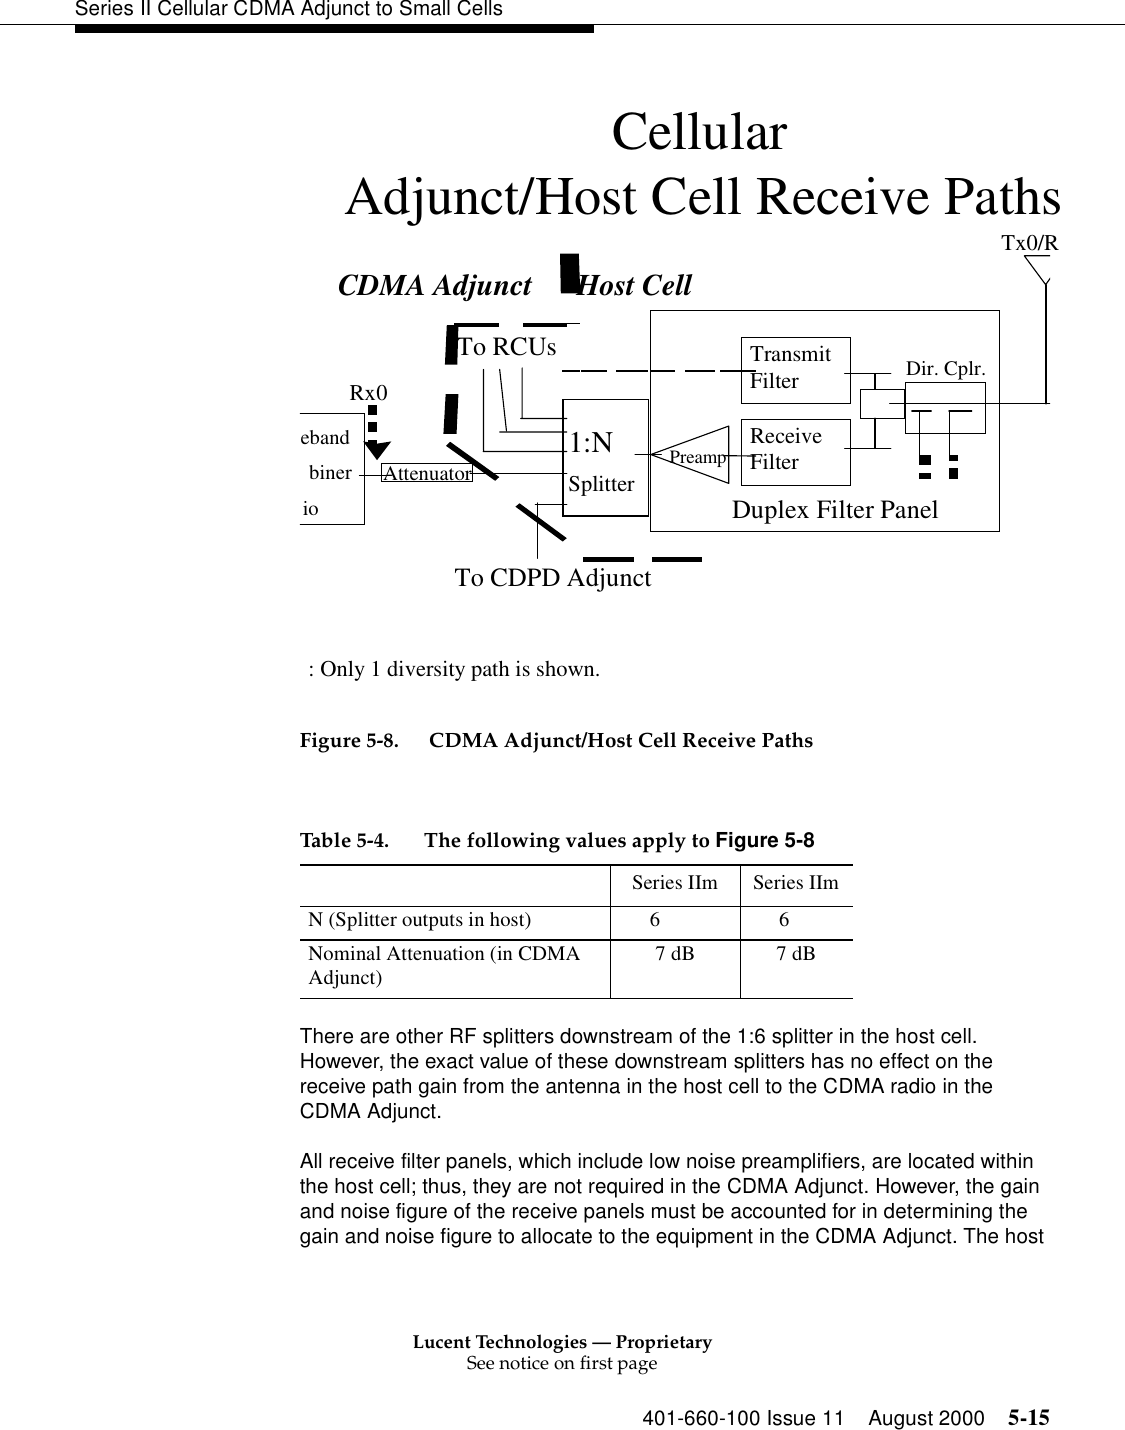 Lucent Technologies — ProprietarySee notice on first page401-660-100 Issue 11 August 2000 5-15Series II Cellular CDMA Adjunct to Small Cells Figure 5-8. CDMA Adjunct/Host Cell Receive PathsThere are other RF splitters downstream of the 1:6 splitter in the host cell. However, the exact value of these downstream splitters has no effect on the receive path gain from the antenna in the host cell to the CDMA radio in the CDMA Adjunct.All receive filter panels, which include low noise preamplifiers, are located within the host cell; thus, they are not required in the CDMA Adjunct. However, the gain and noise figure of the receive panels must be accounted for in determining the gain and noise figure to allocate to the equipment in the CDMA Adjunct. The host CellularAdjunct/Host Cell Receive PathsTransmitFilterReceiveFilterDir. Cplr.: Only 1 diversity path is shown.ebandbinerioPreampDuplex Filter Panel1:NSplitterTo RCUsTo CDPD AdjunctTx0/RRx0AttenuatorCDMA Adjunct Host CellTable 5-4. The following values apply to Figure 5-8Series IIm Series IImN (Splitter outputs in host)       6       6Nominal Attenuation (in CDMA Adjunct) 7 dB 7 dB